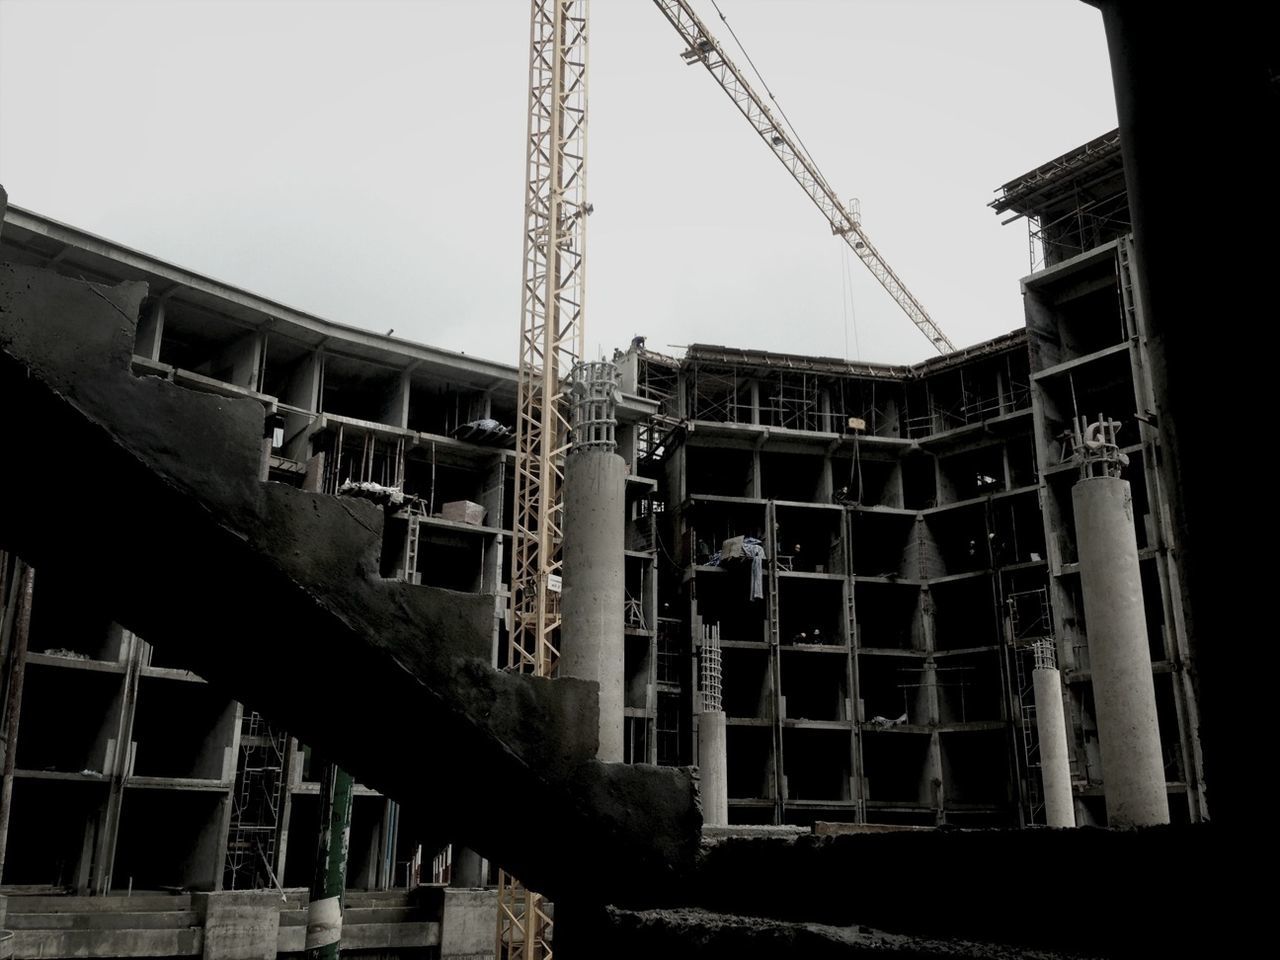 architecture, built structure, building exterior, low angle view, construction site, clear sky, construction, development, building, residential building, incomplete, crane - construction machinery, city, construction industry, industry, residential structure, outdoors, day, sky, no people